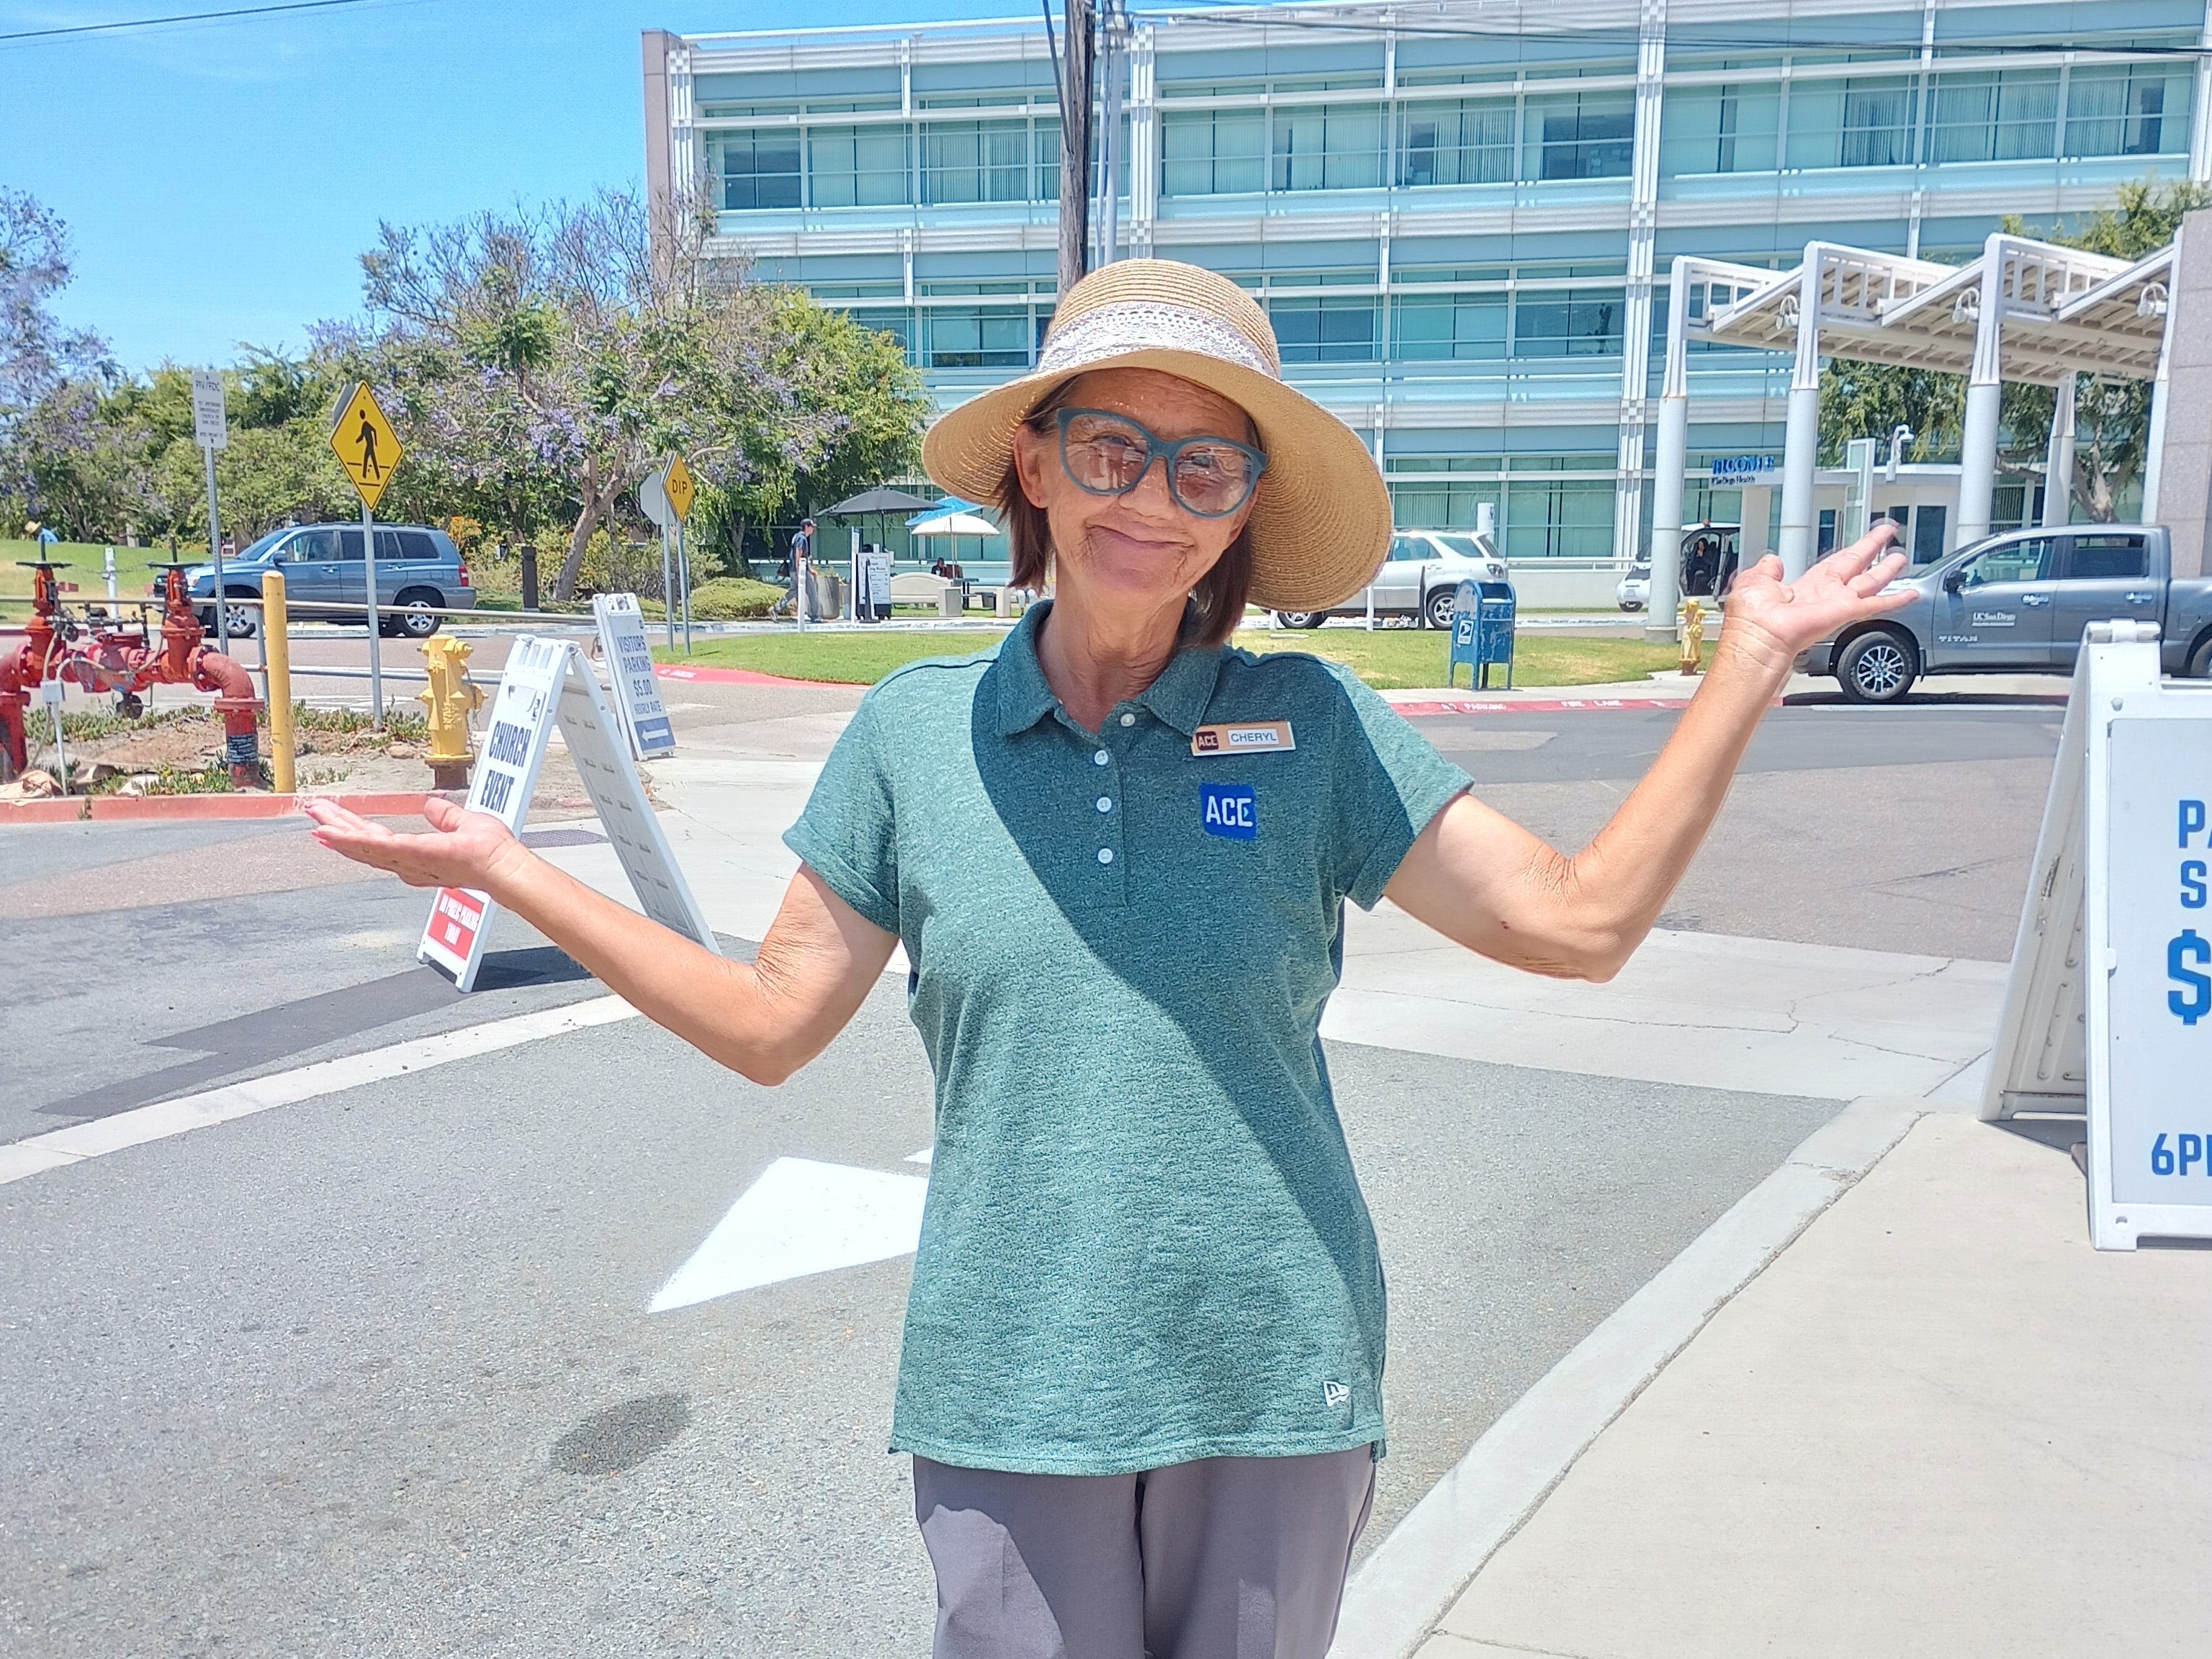 A 62-year-old employed 'peak boomer' in California makes too much for affordable housing but lives in her car: 'I'll work until I drop'